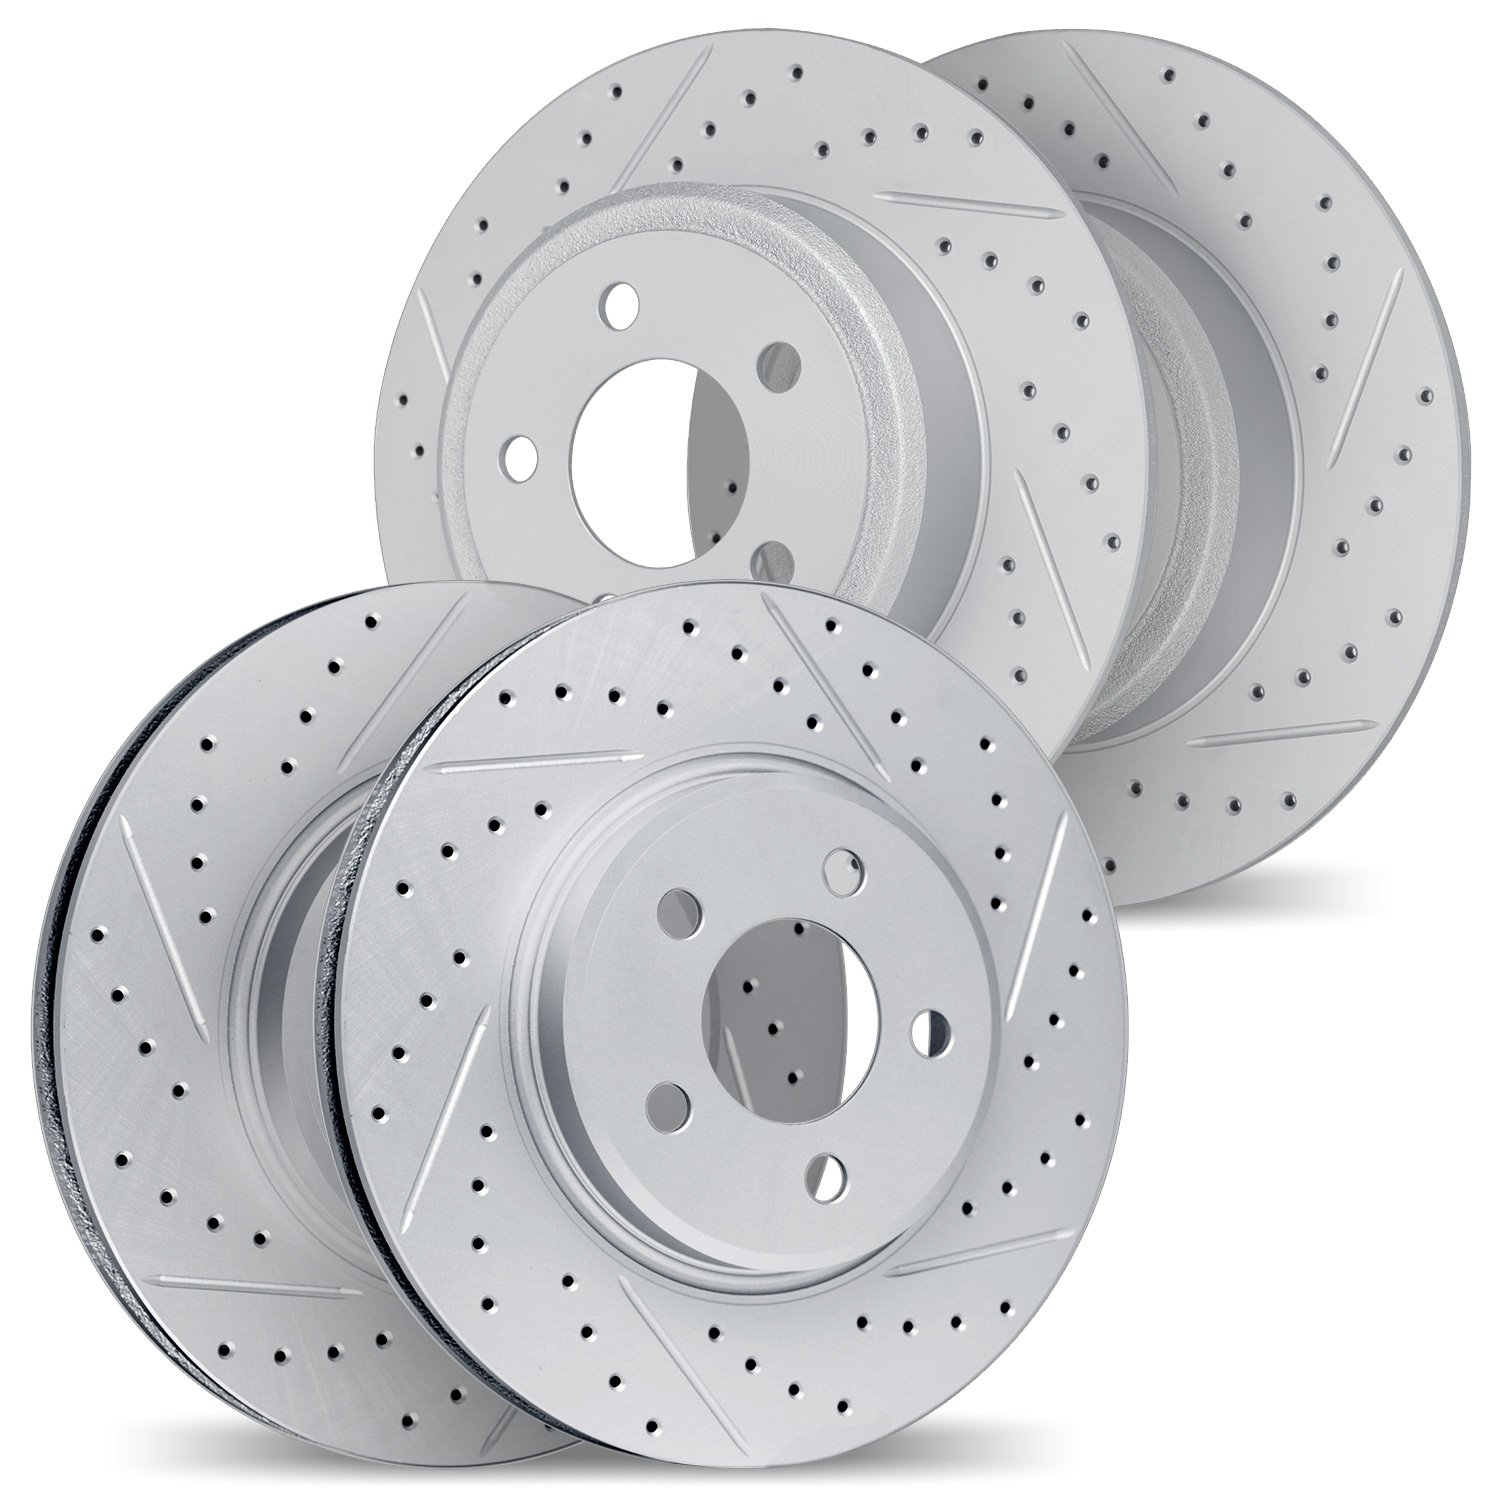 2004-59064 Geoperformance Drilled/Slotted Brake Rotors, 2002-2004 Acura/Honda, Position: Front and Rear